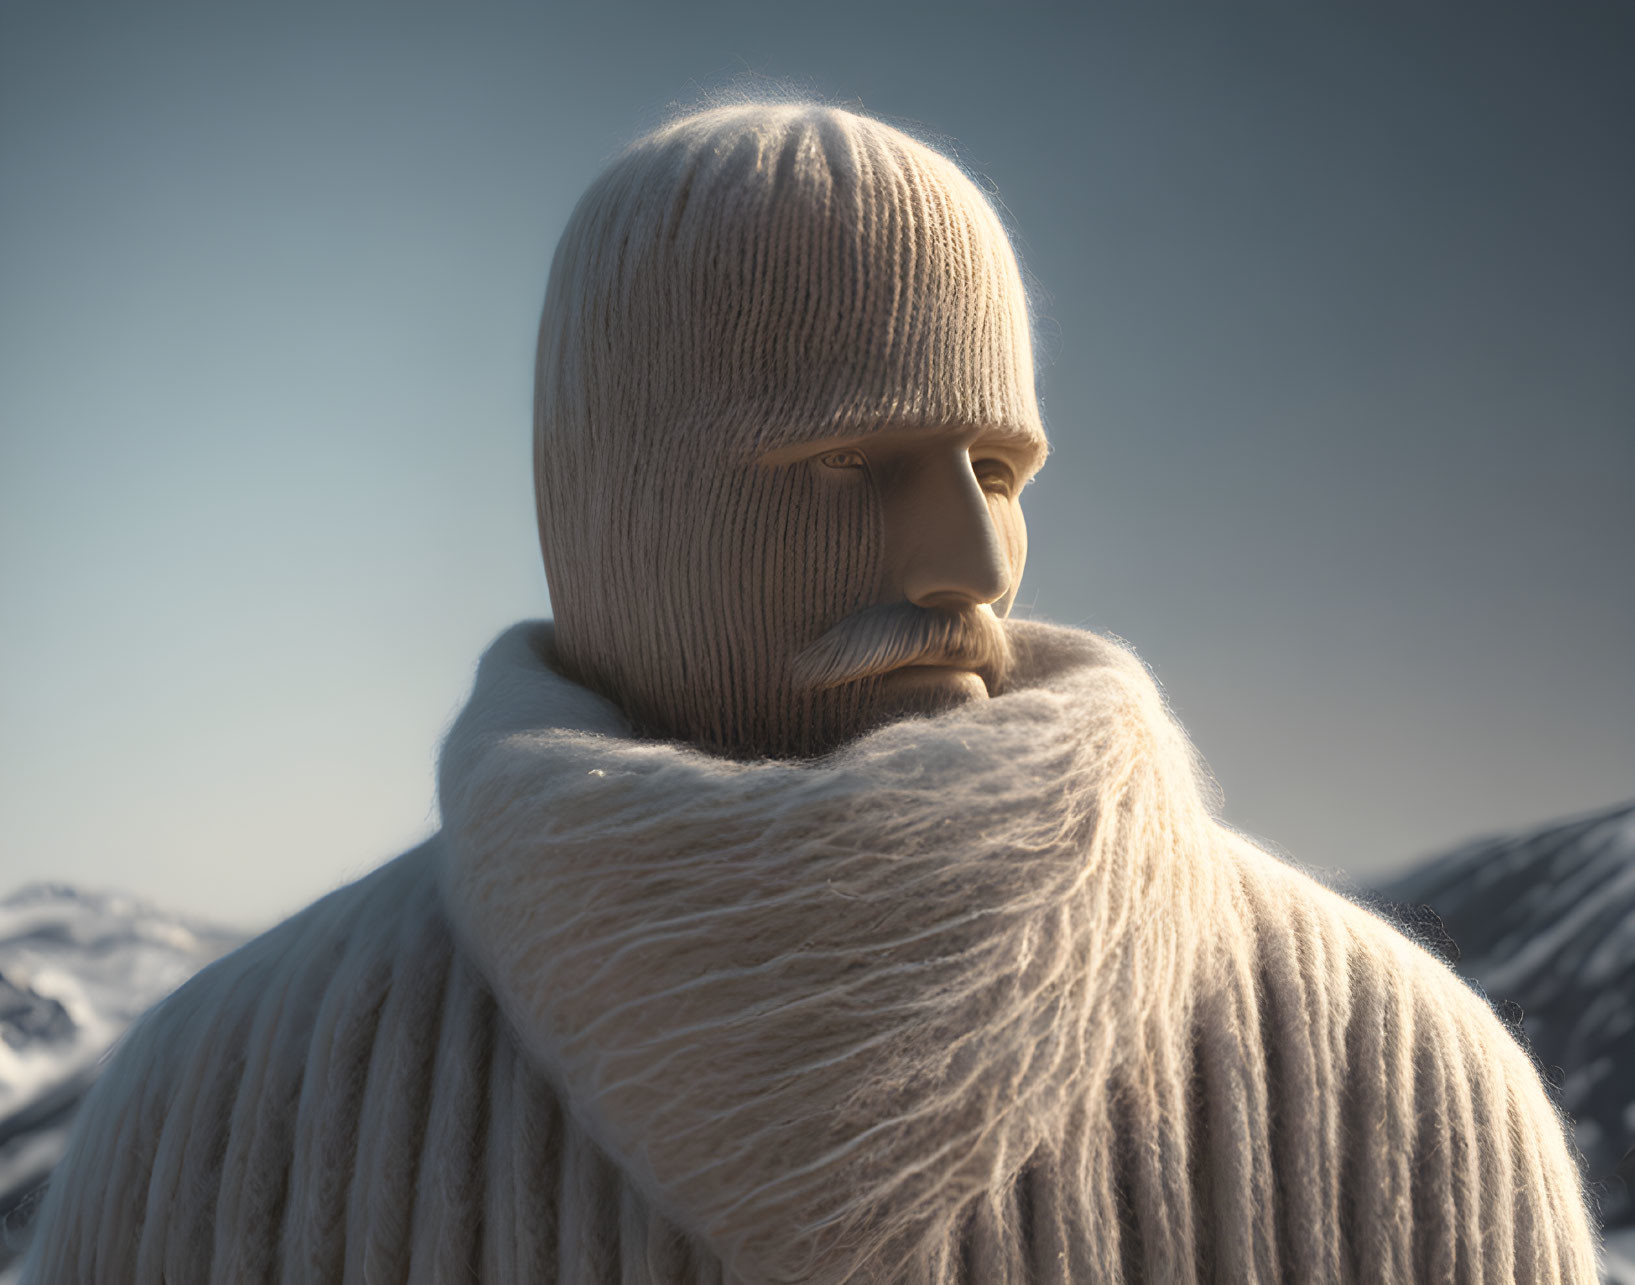 A man made of wool